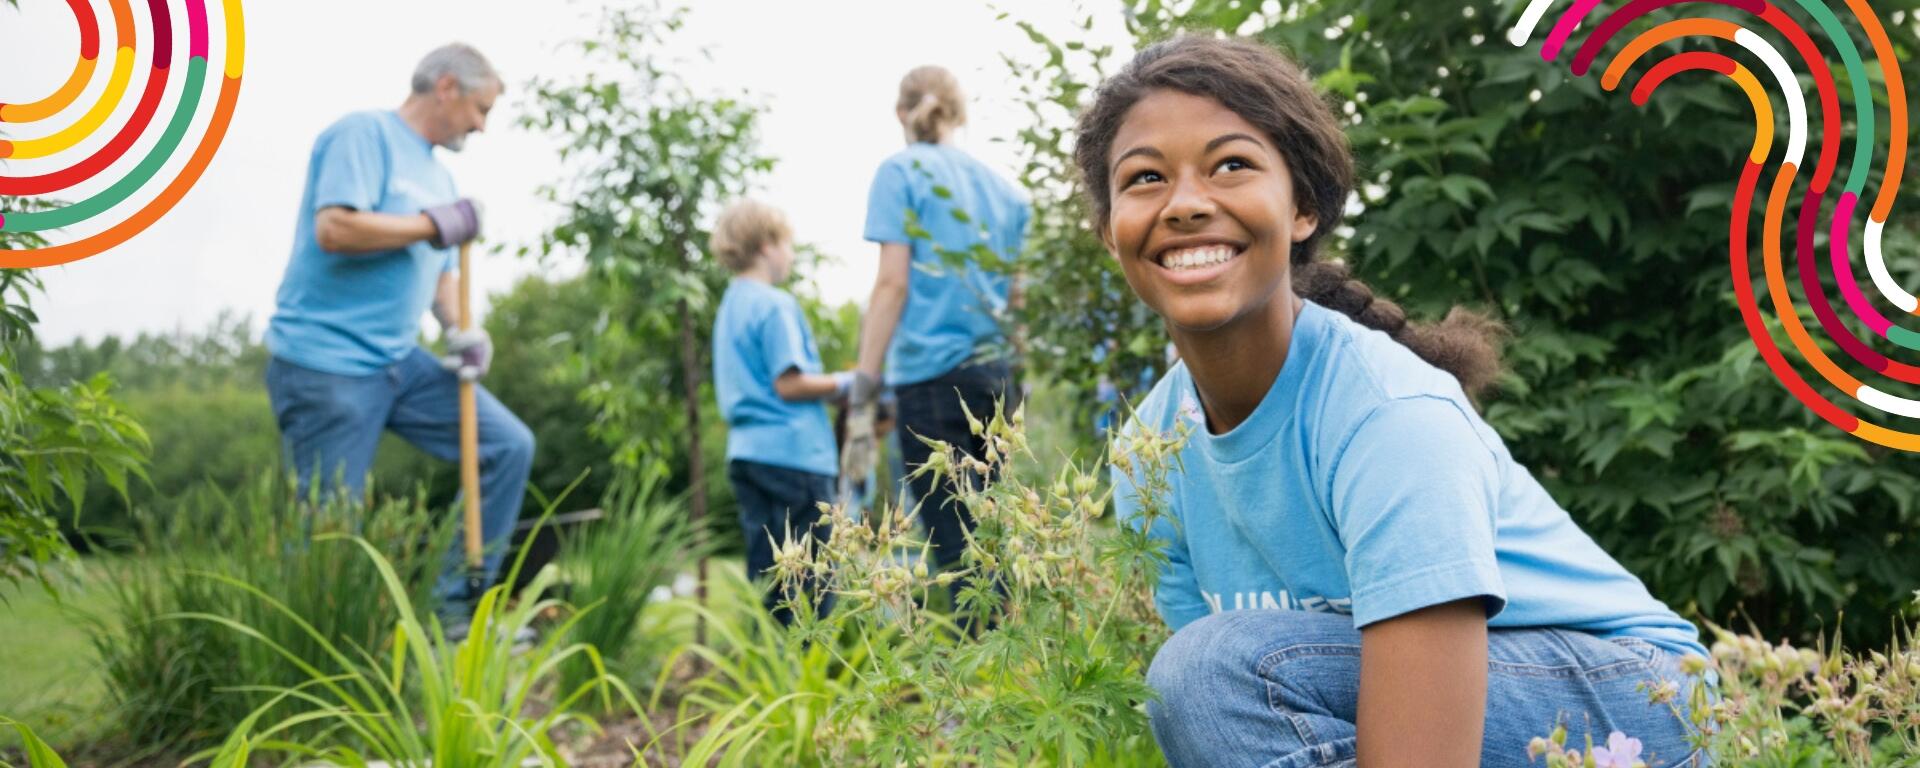 A young person in gardening gloves smiling, with a group of three other people in the background. They are working outdoors. 